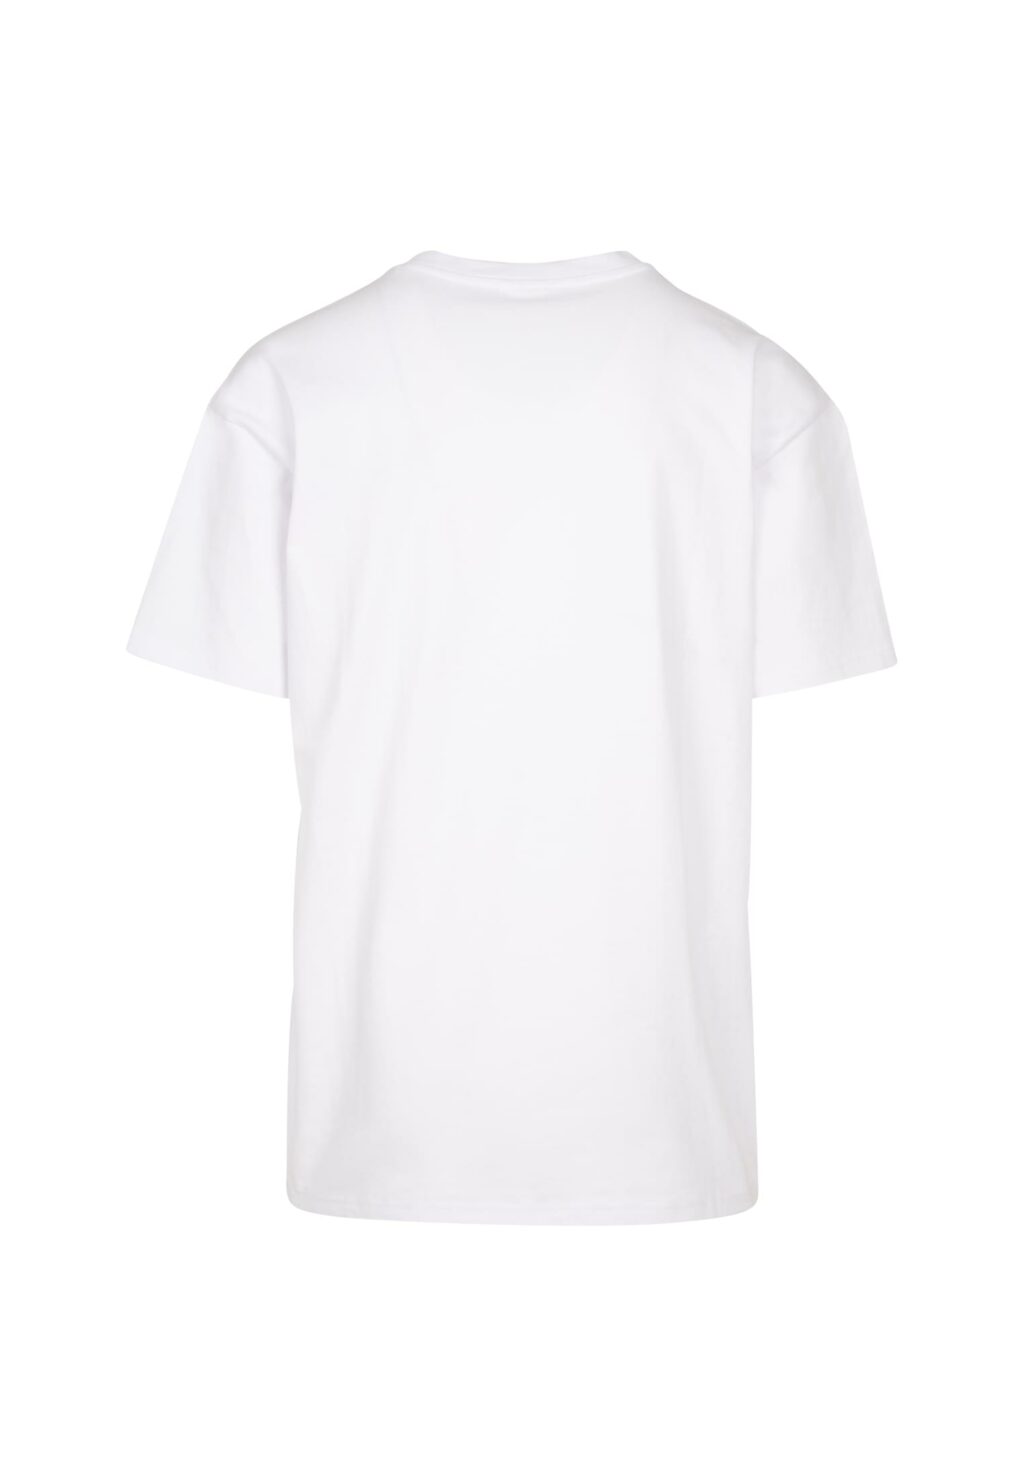 Gucci Mane So Icy Oversize Tee white MT3022